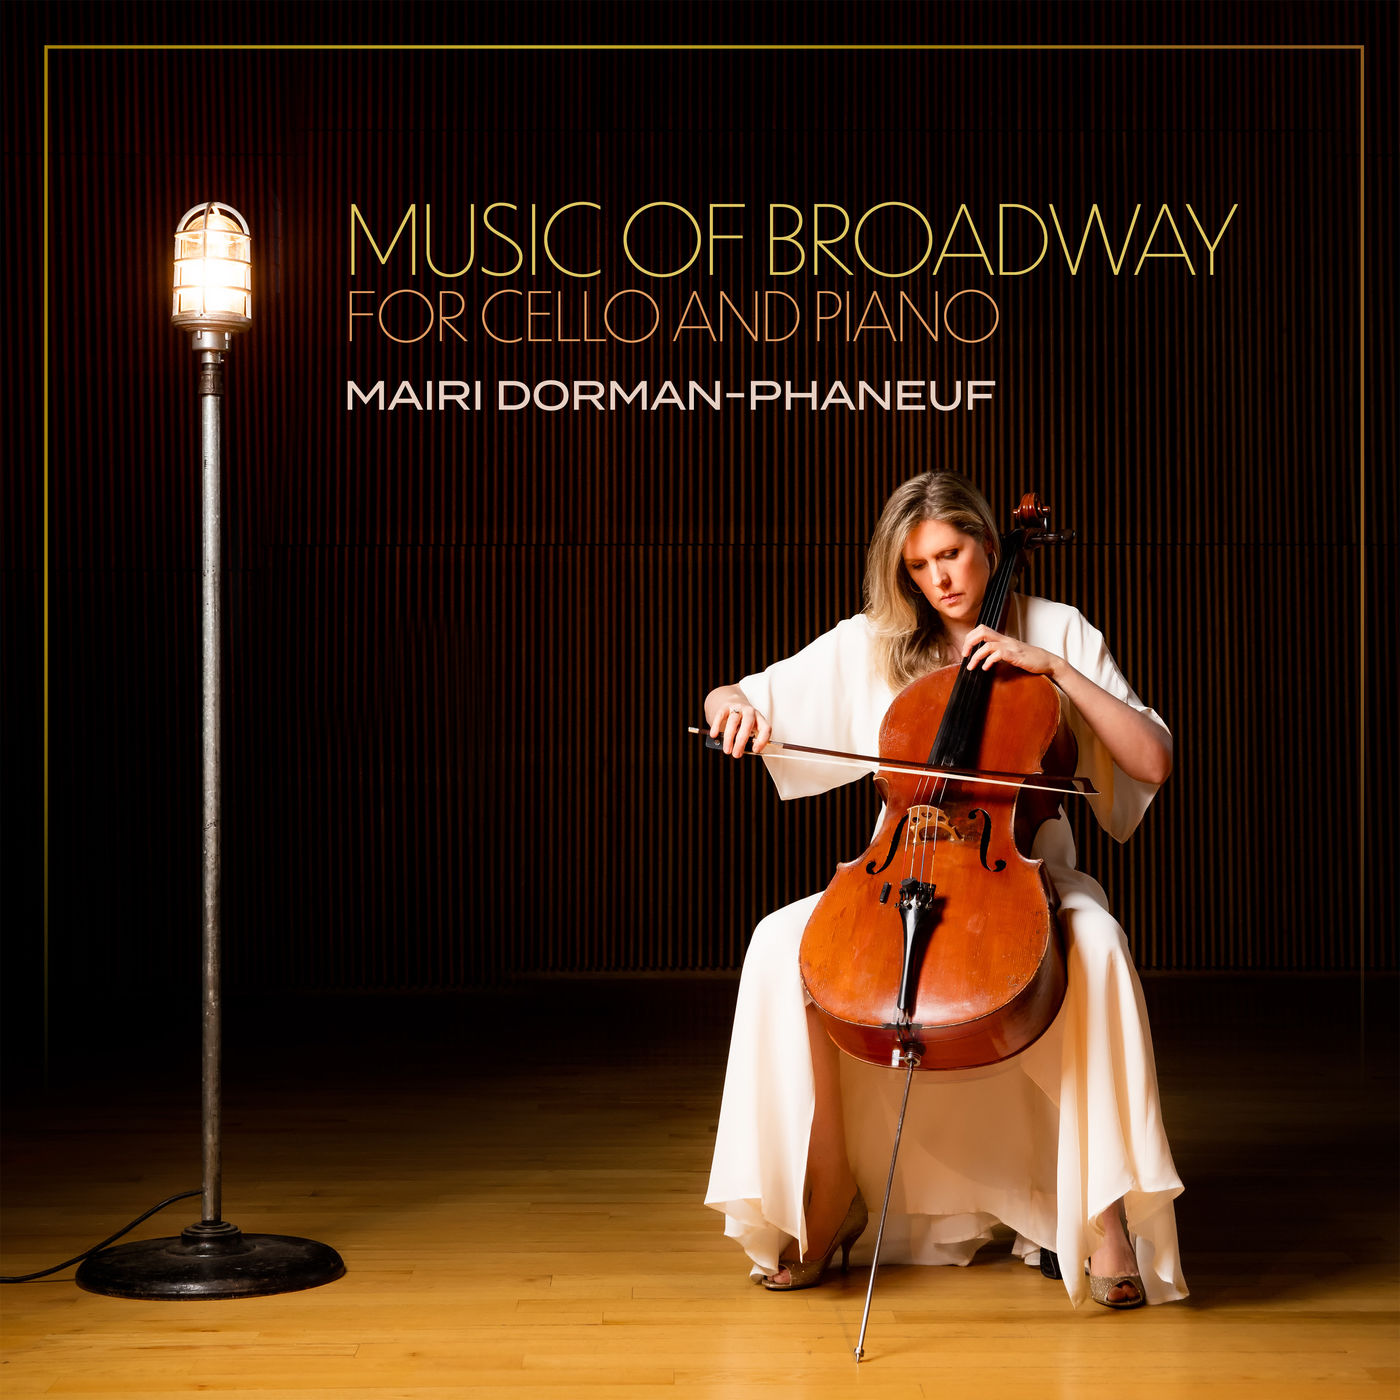 Mairi Dorman-Phaneuf – Music Of Broadway For Cello And Piano (2021) [FLAC 24bit/96kHz]